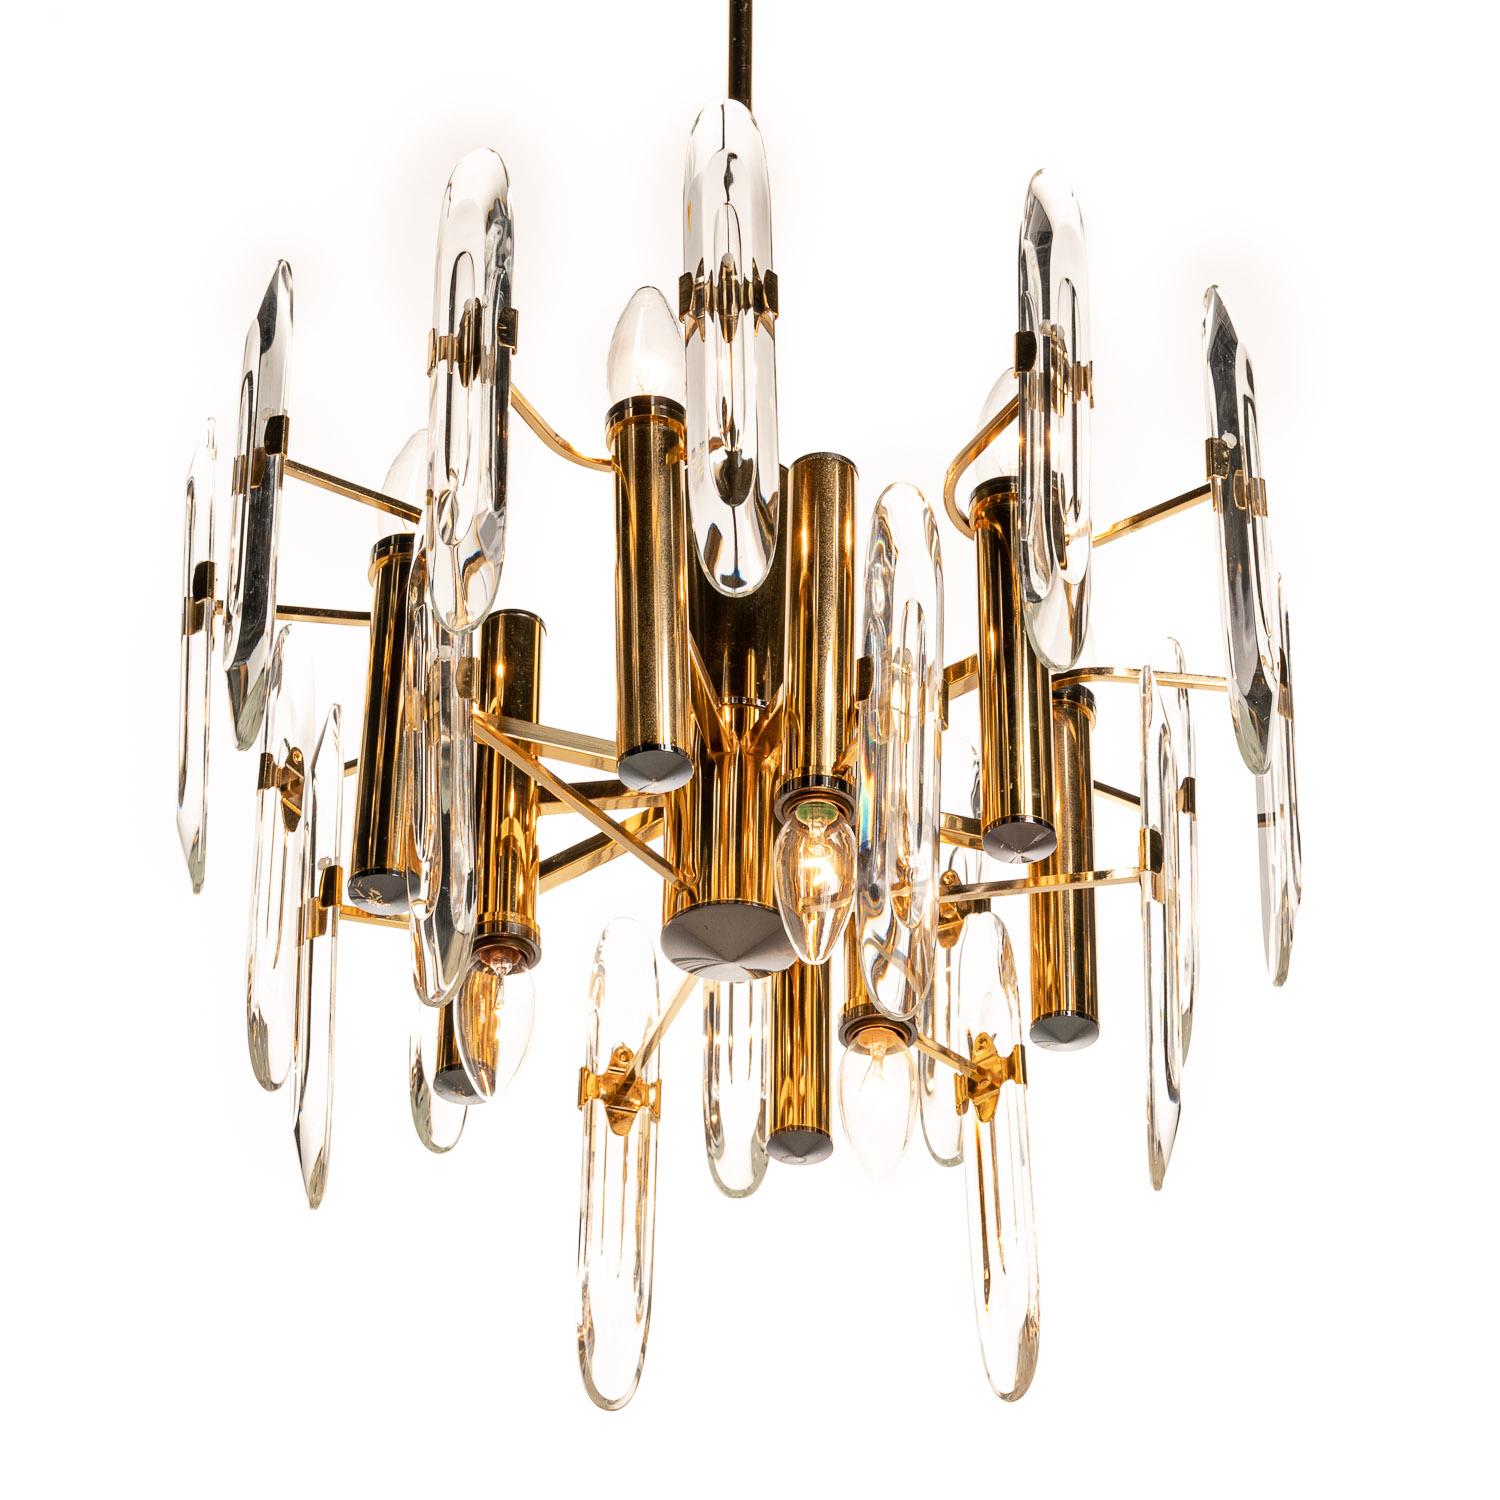 Classic 1970s Italian Gaetano Sciolari design chandelier with characteristic use of crystal glass and layered tiers on a brass frame. It holds nine E14 lights of which three facing down.